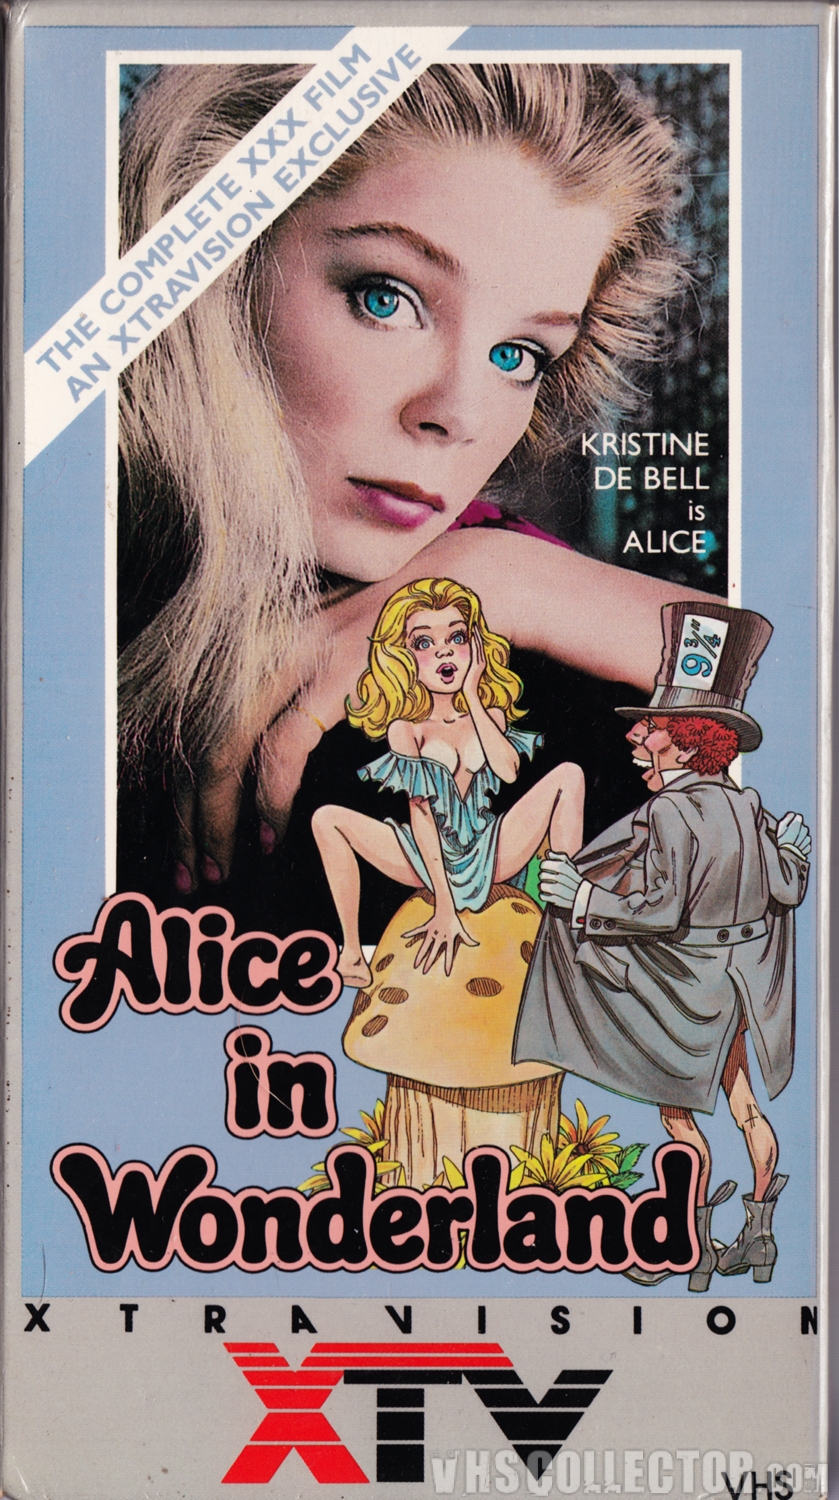 ariel isaac recommends Alice In Wonderland Debell